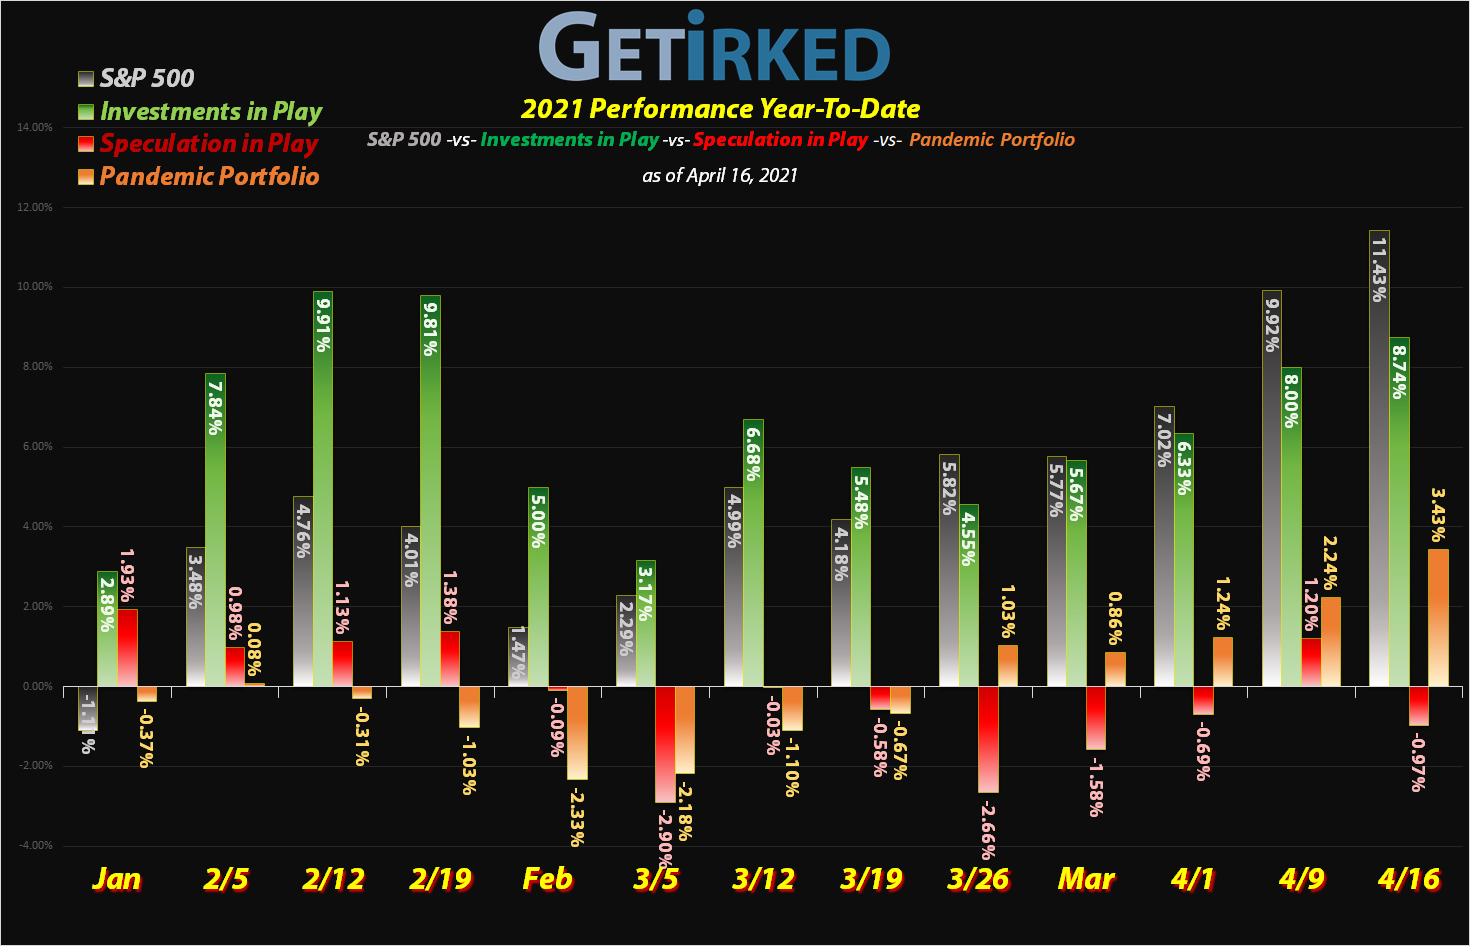 Get Irked - Year-to-Date Performance - Investments in Play vs. Speculation in Play - 2020 Year-to-Date Performance